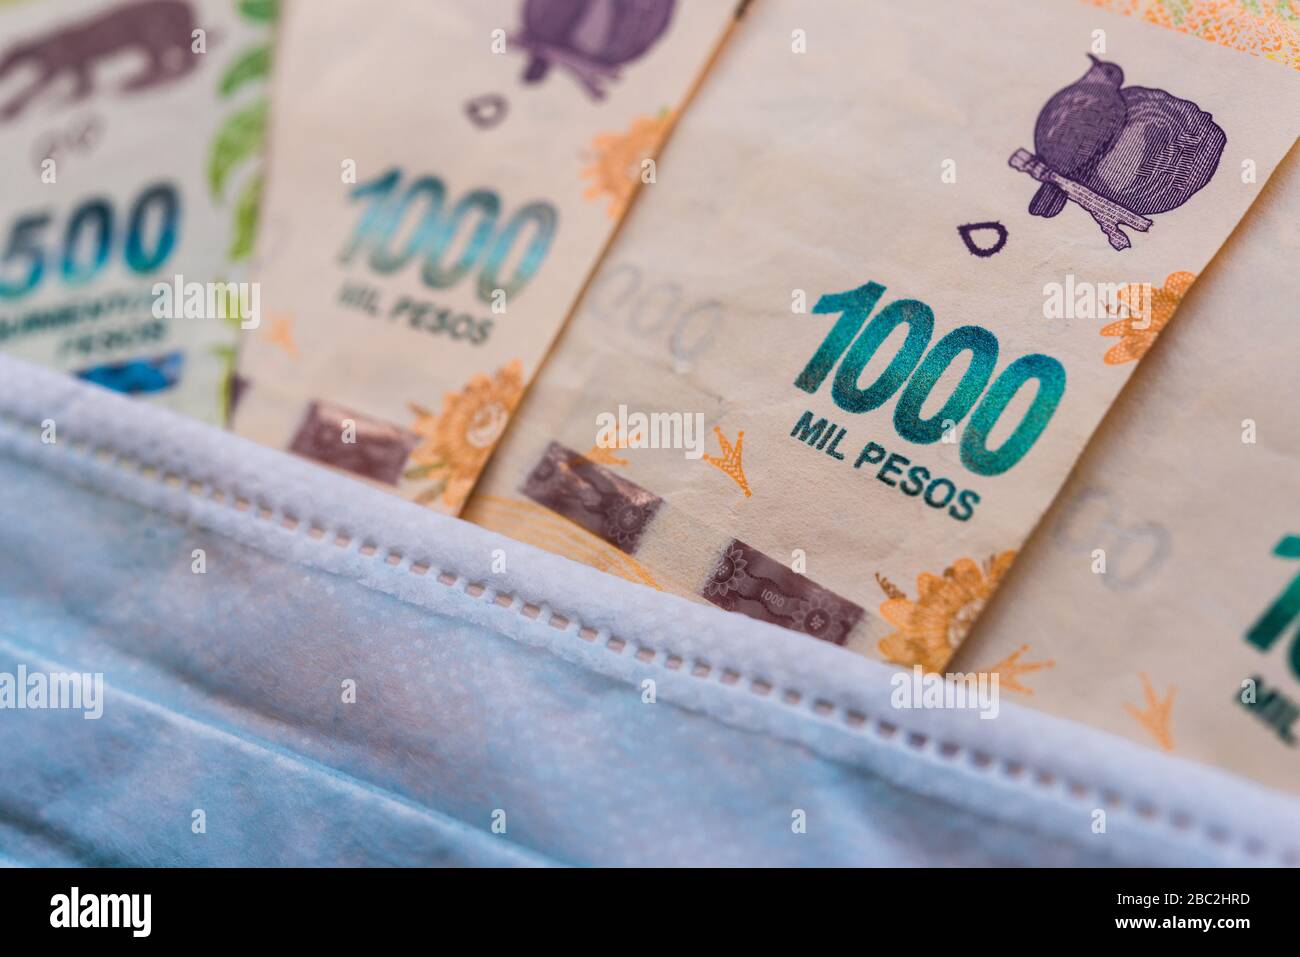 1000 and 500 Argentina peso with face mask against coronavirus covid-19 pandemic Stock Photo